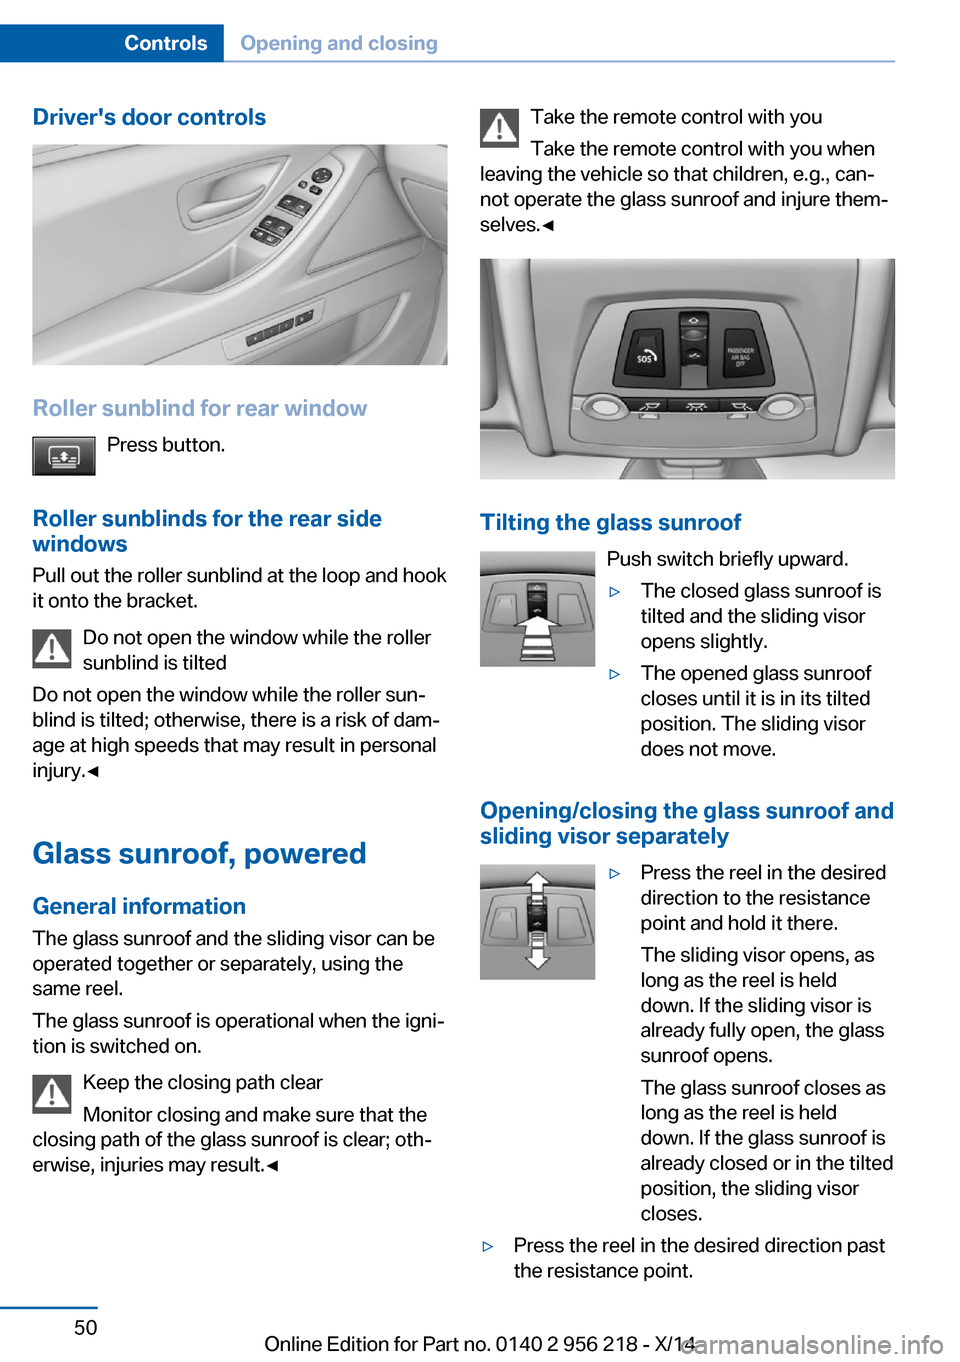 BMW 5 SERIES 2014 F10 Owners Guide Drivers door controls
Roller sunblind for rear windowPress button.
Roller sunblinds for the rear side
windows
Pull out the roller sunblind at the loop and hook
it onto the bracket.
Do not open the wi